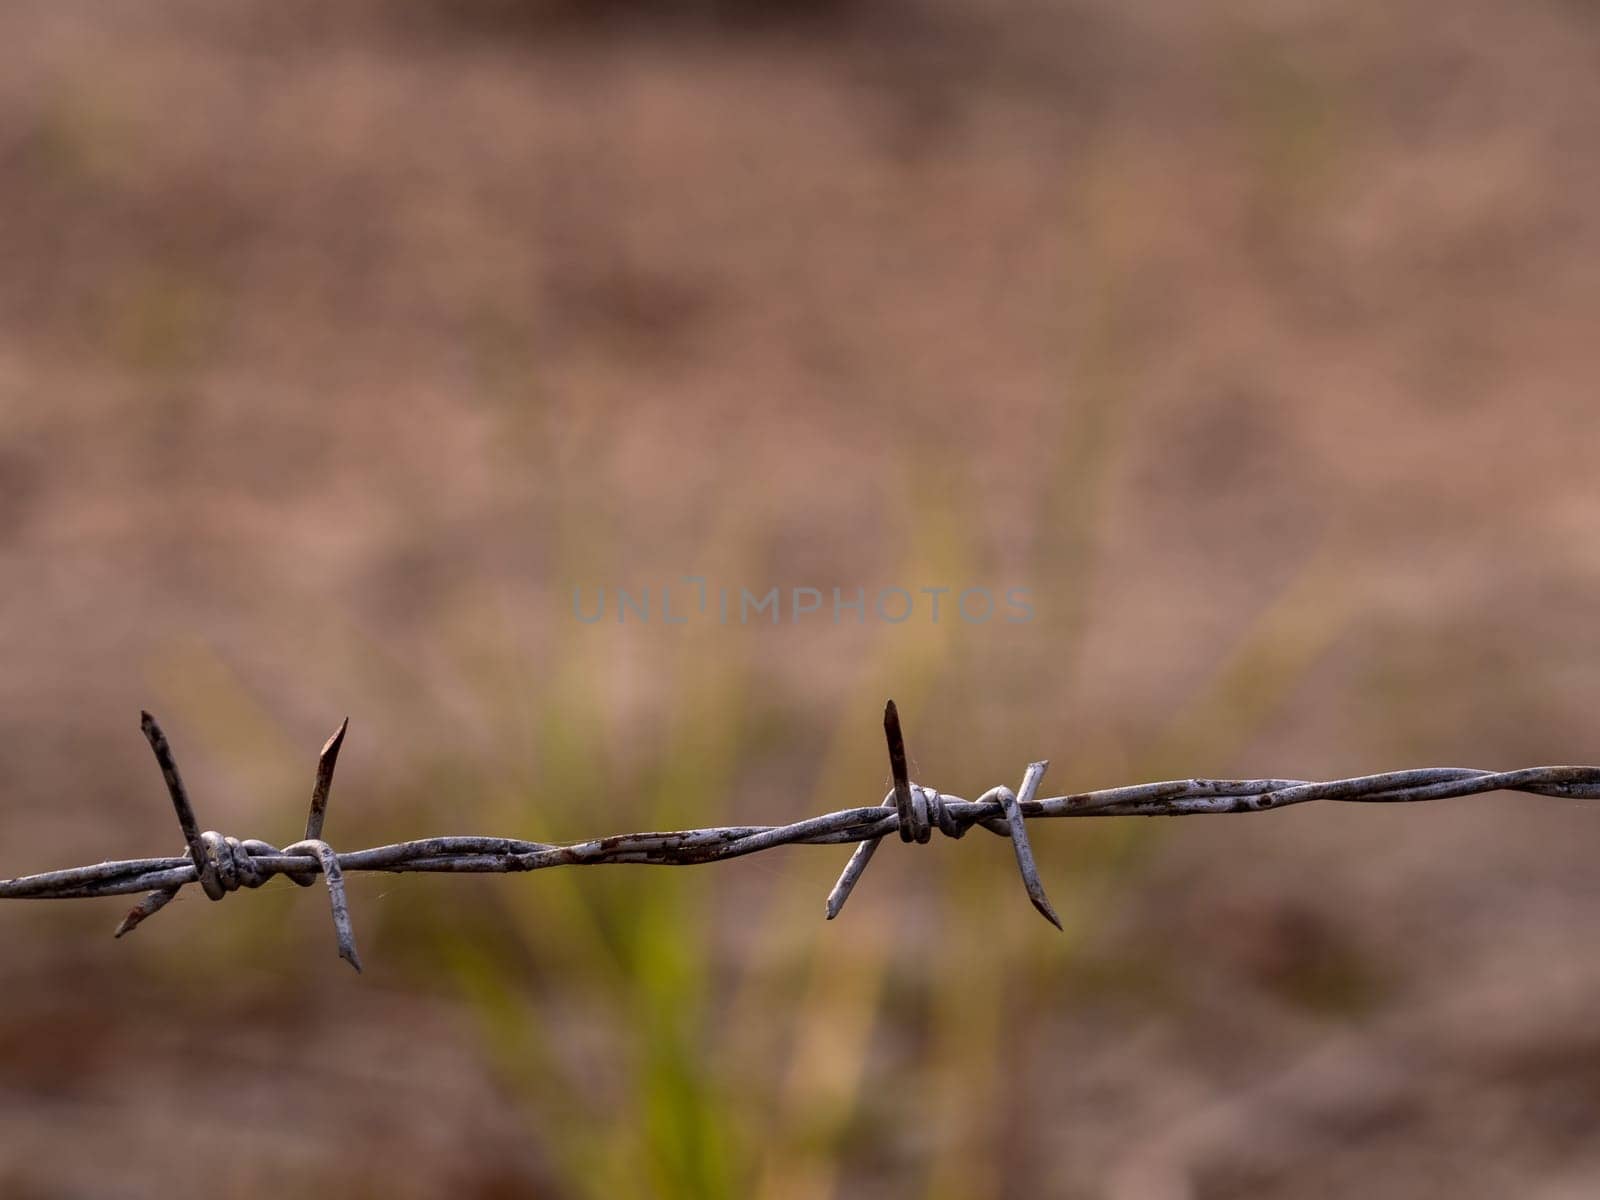 Rusty barbed wire fences are sharp and aggressive